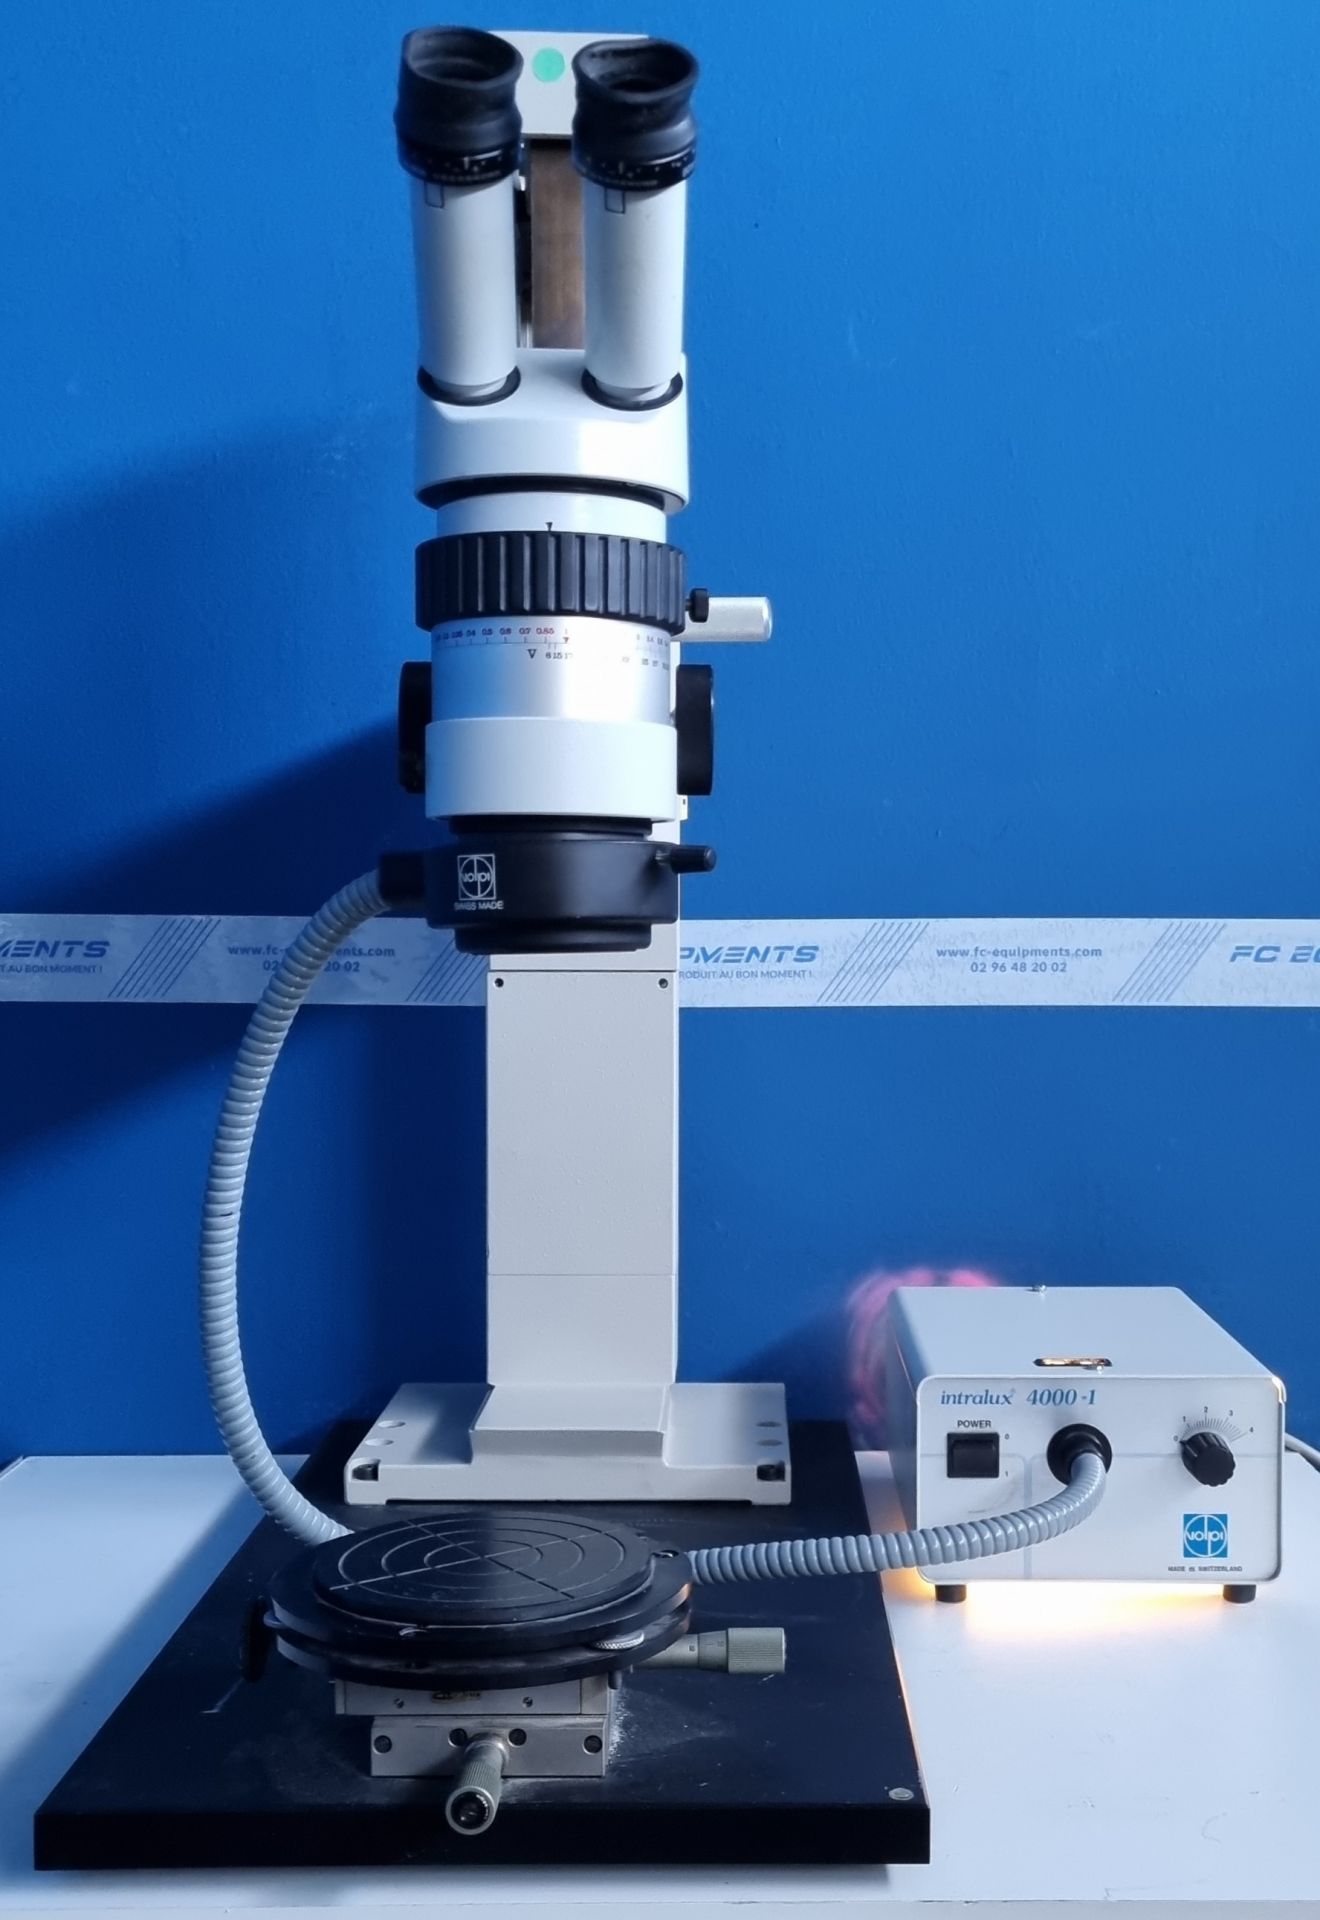 Wild heerbrugg m7a stereo microscope   volpi intralux 4000-1 light source_0